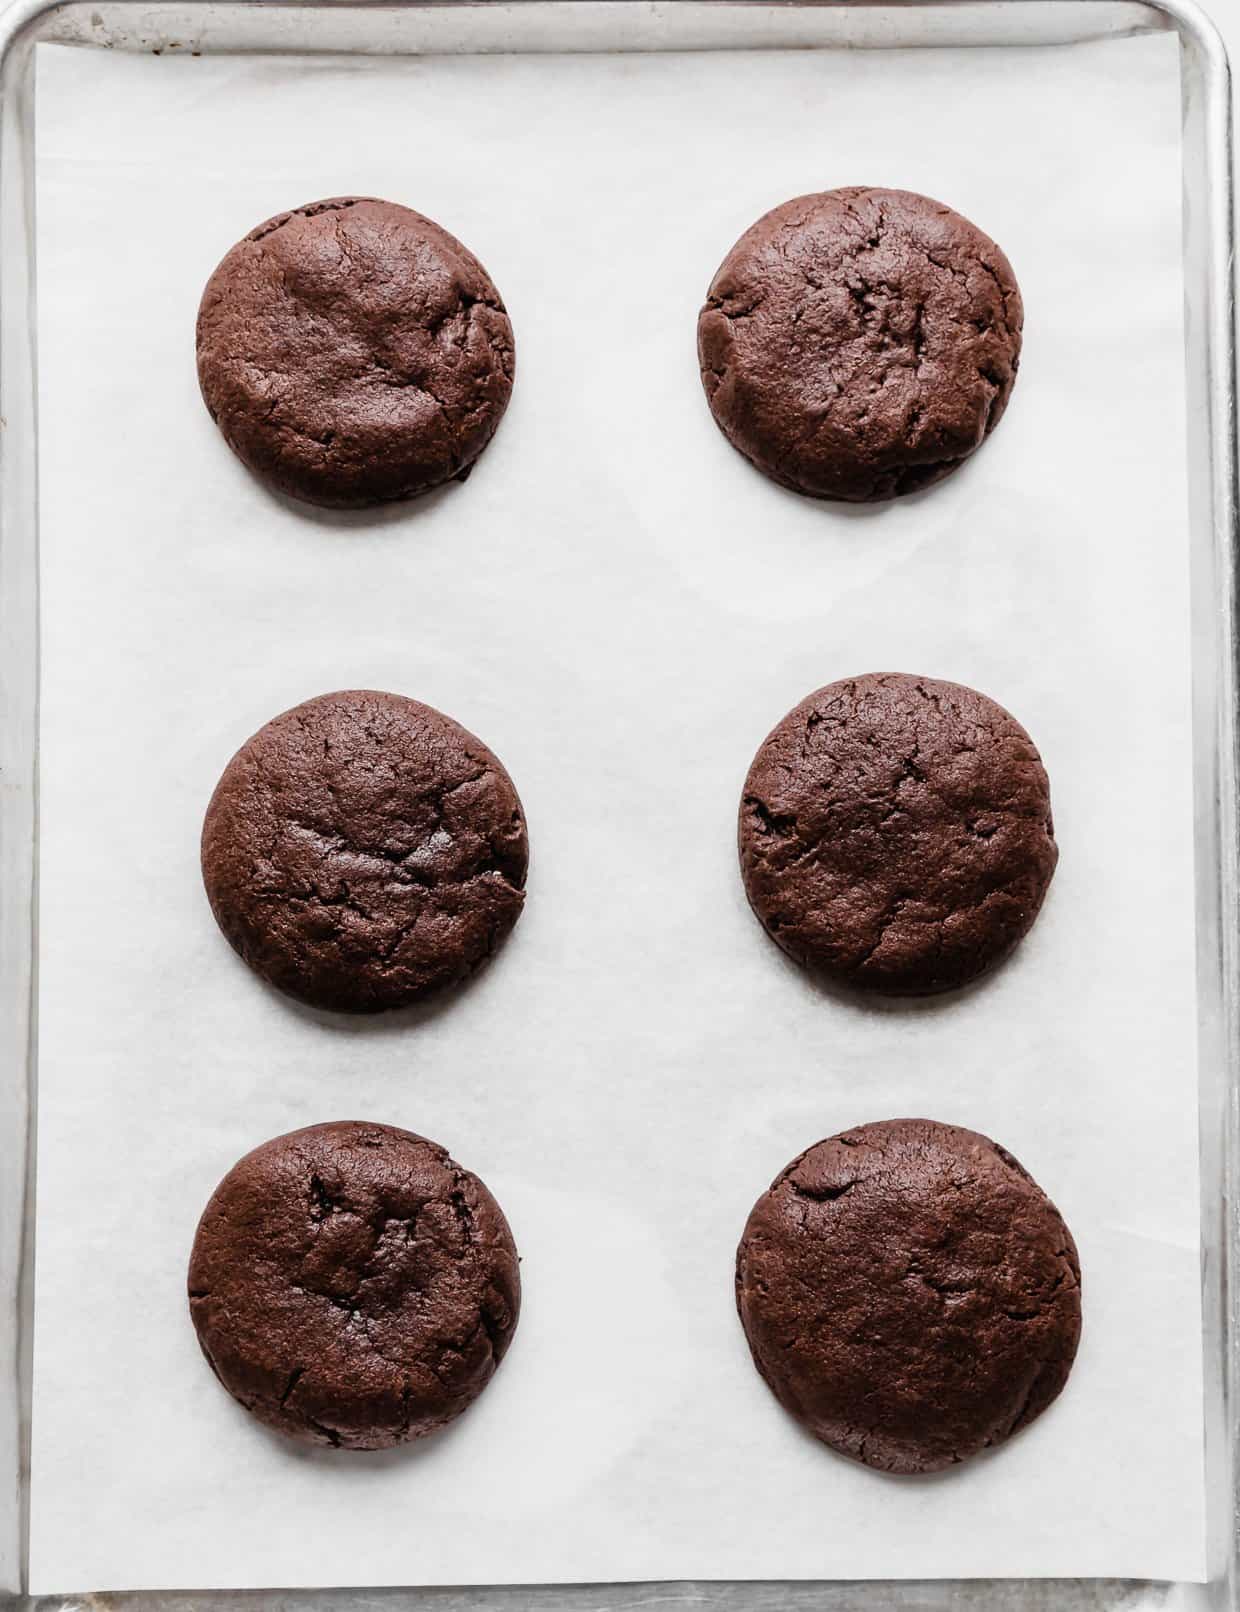 Six baked chocolate molten lava cookies on a white parchment paper.